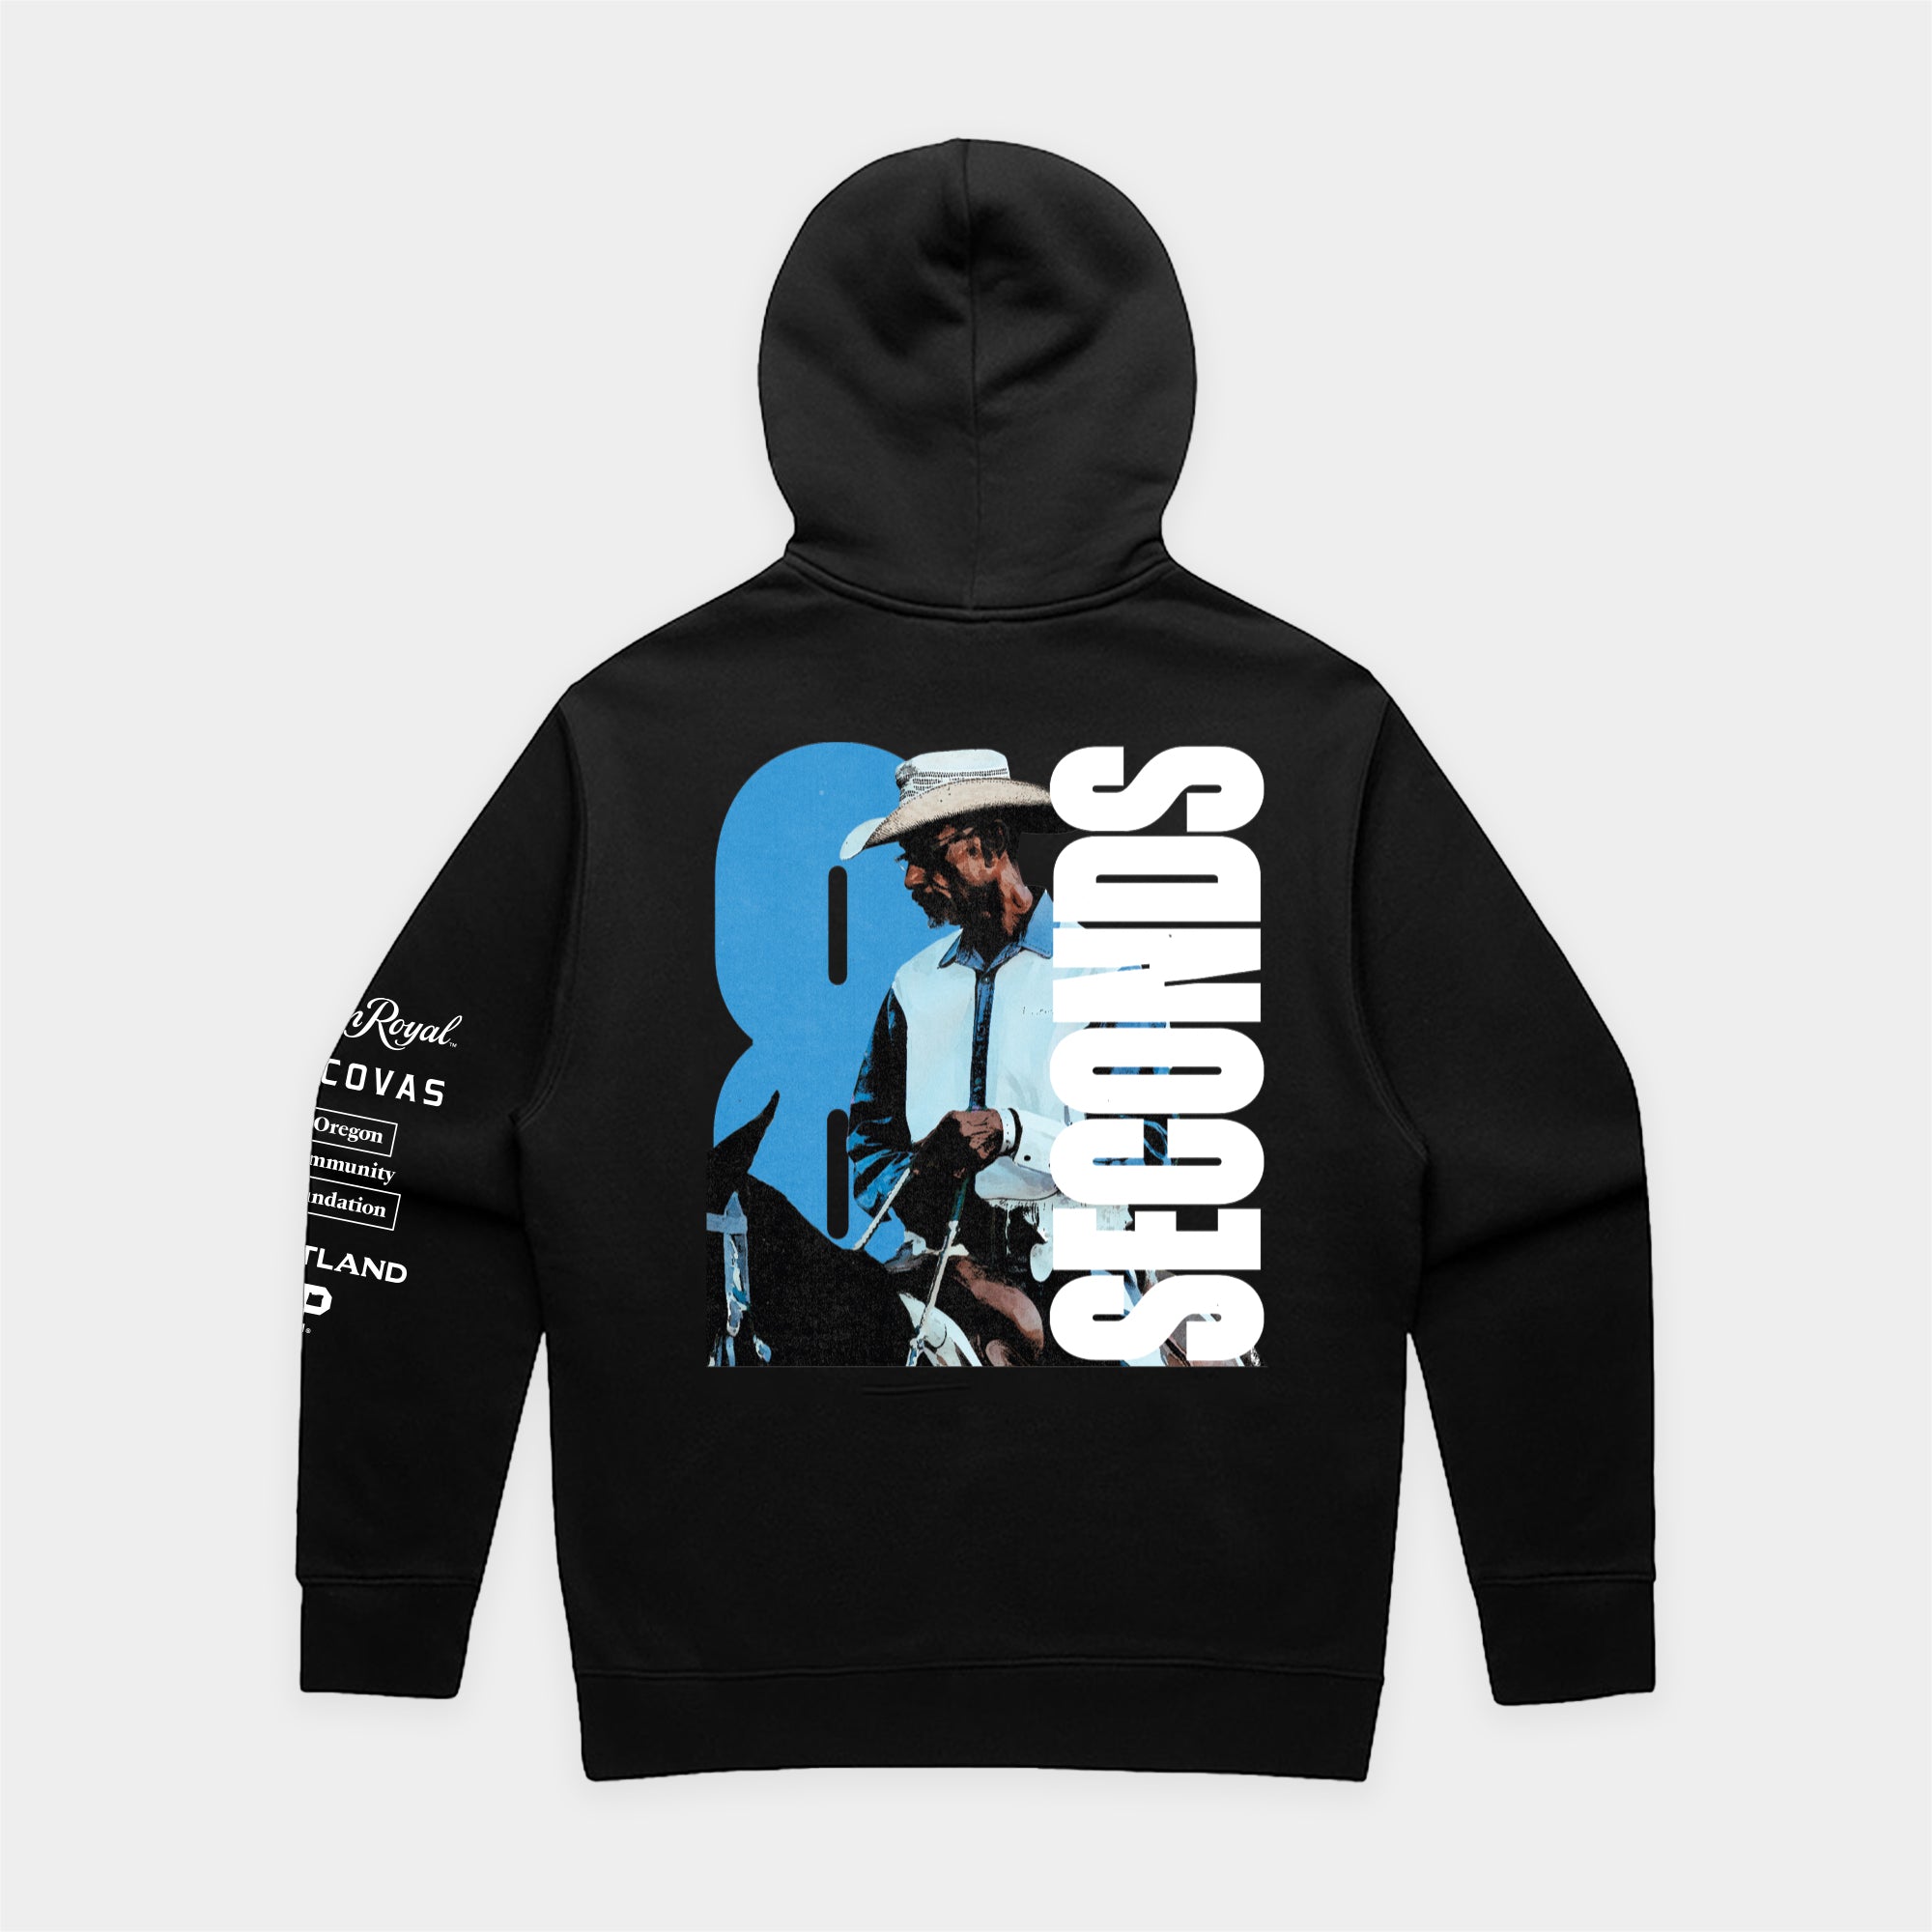 Eight Seconds Rodeo Hoodie